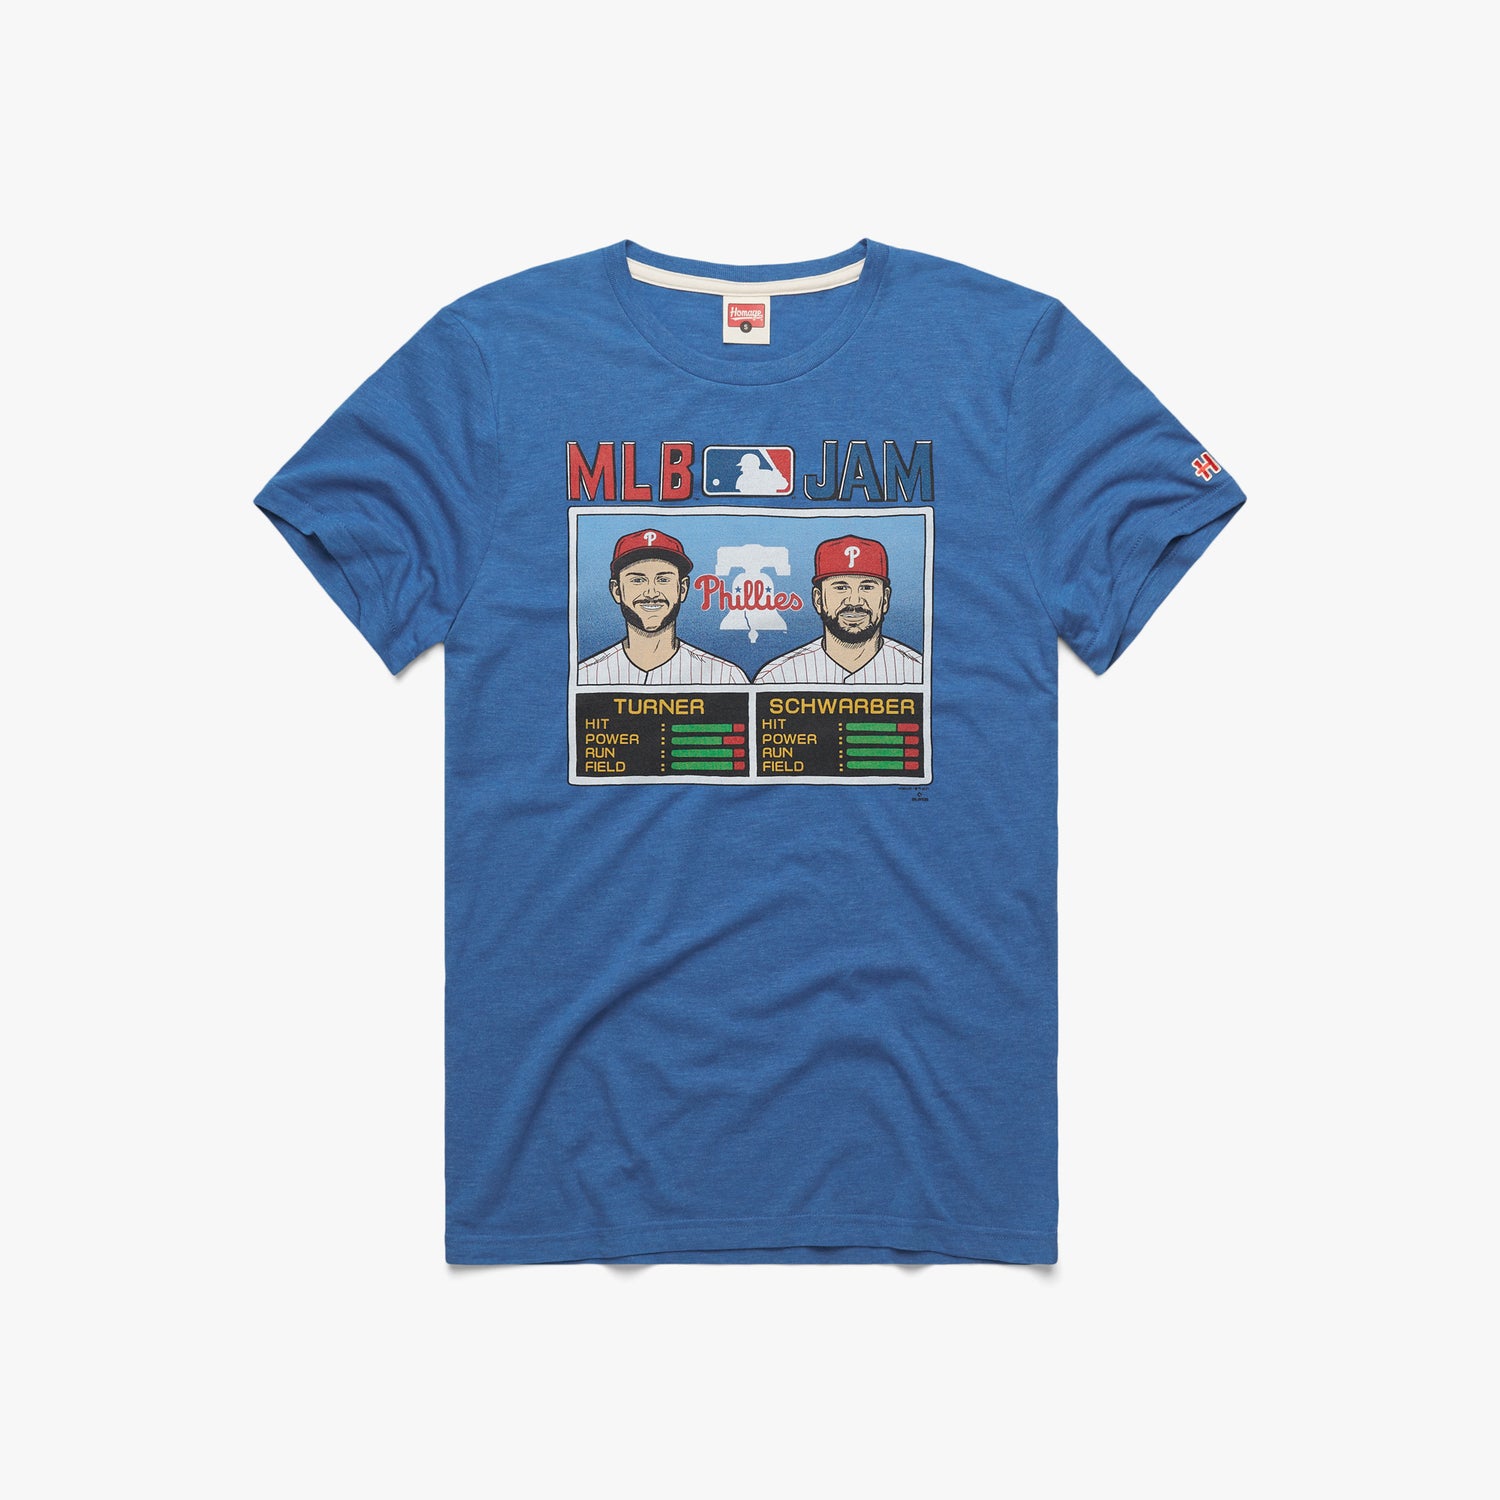 MLB Jam Phillies Turner and Schwarber T-Shirt from Homage. | Royal Blue | Vintage Apparel from Homage.